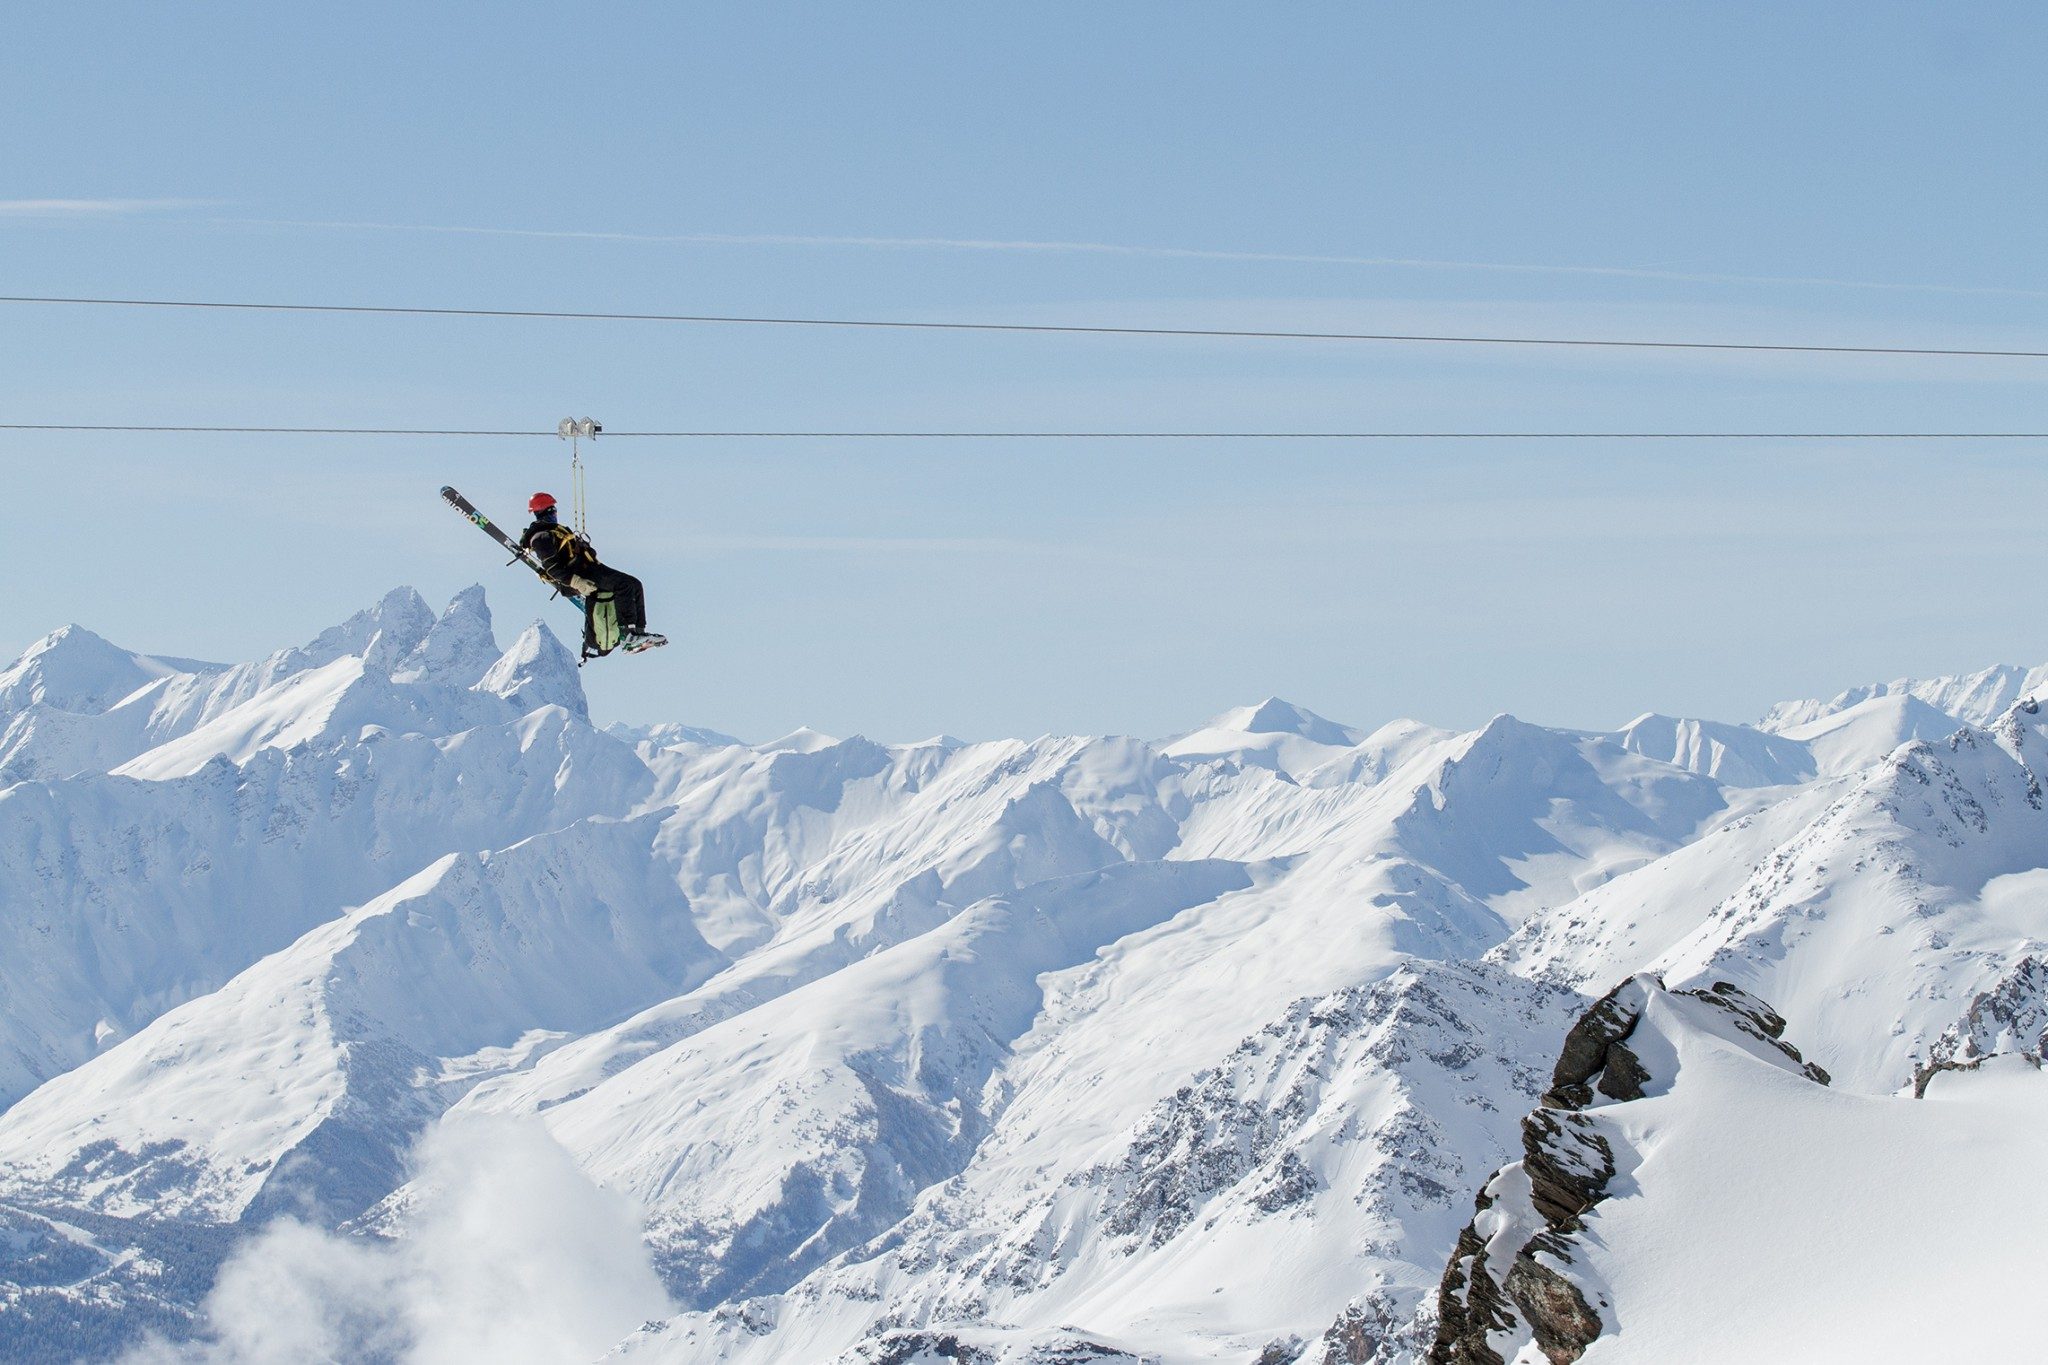 8 Cool Things To Do Besides Ski … In A Ski Resort